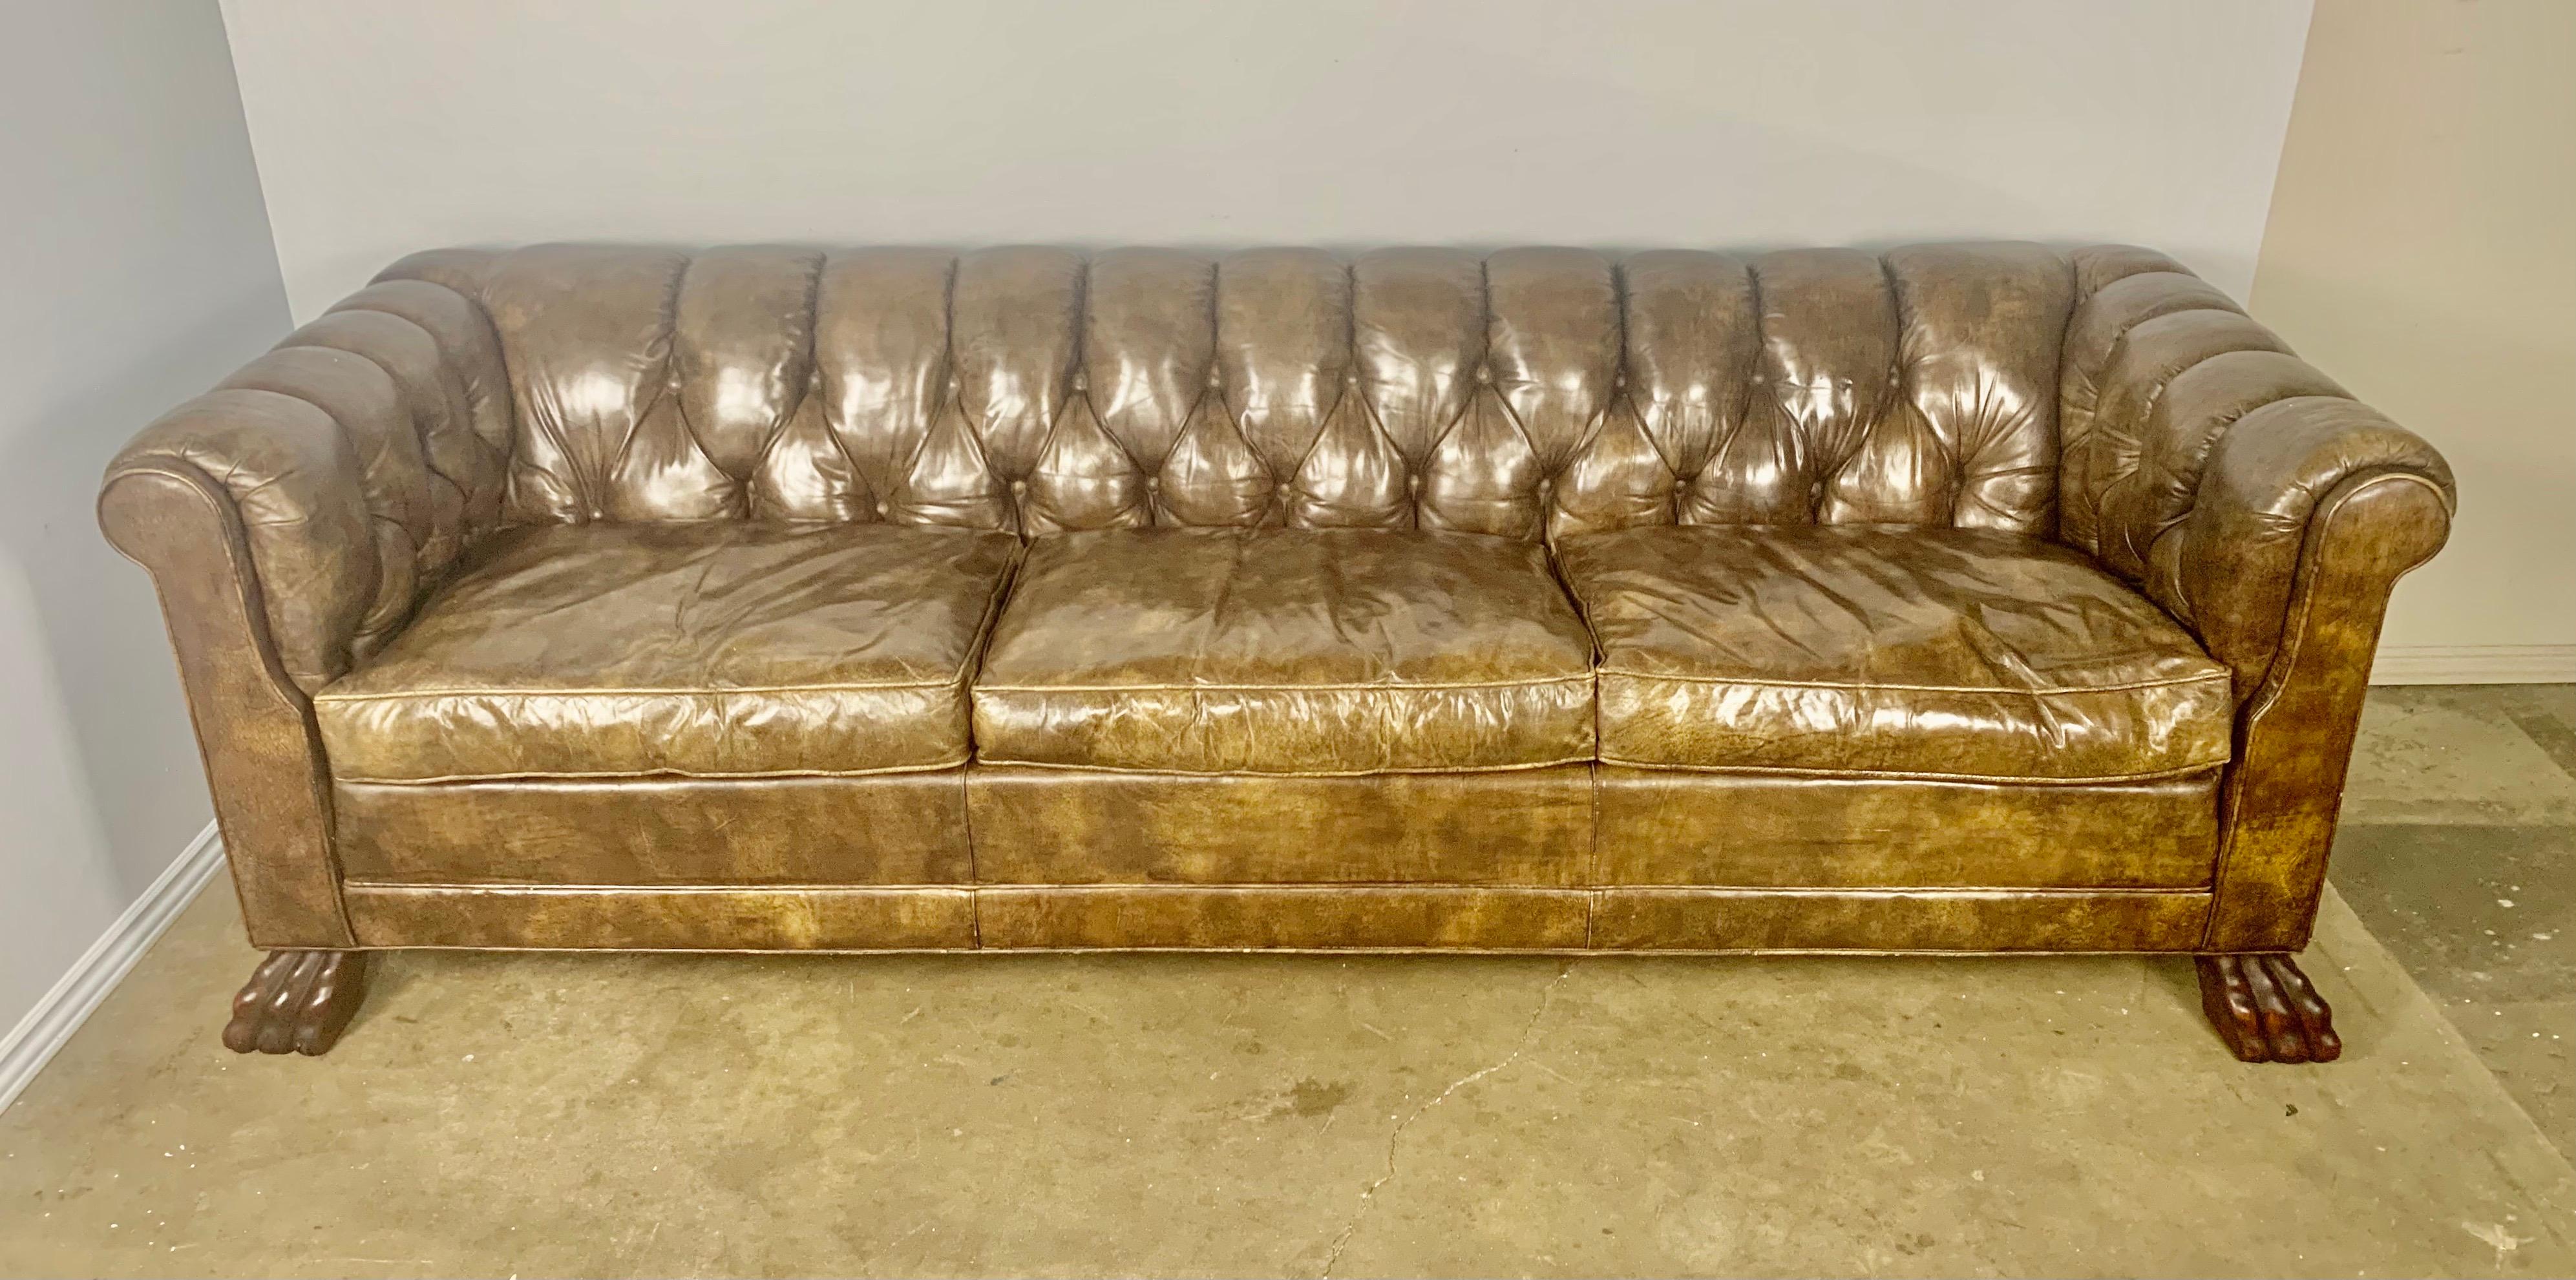 Vintage English tufted Chesterfield style sofa with loose seat cushions. The back and arms are tufted and the leather is beautifully worn. The sofa stands on four hand carved lion paw feet.